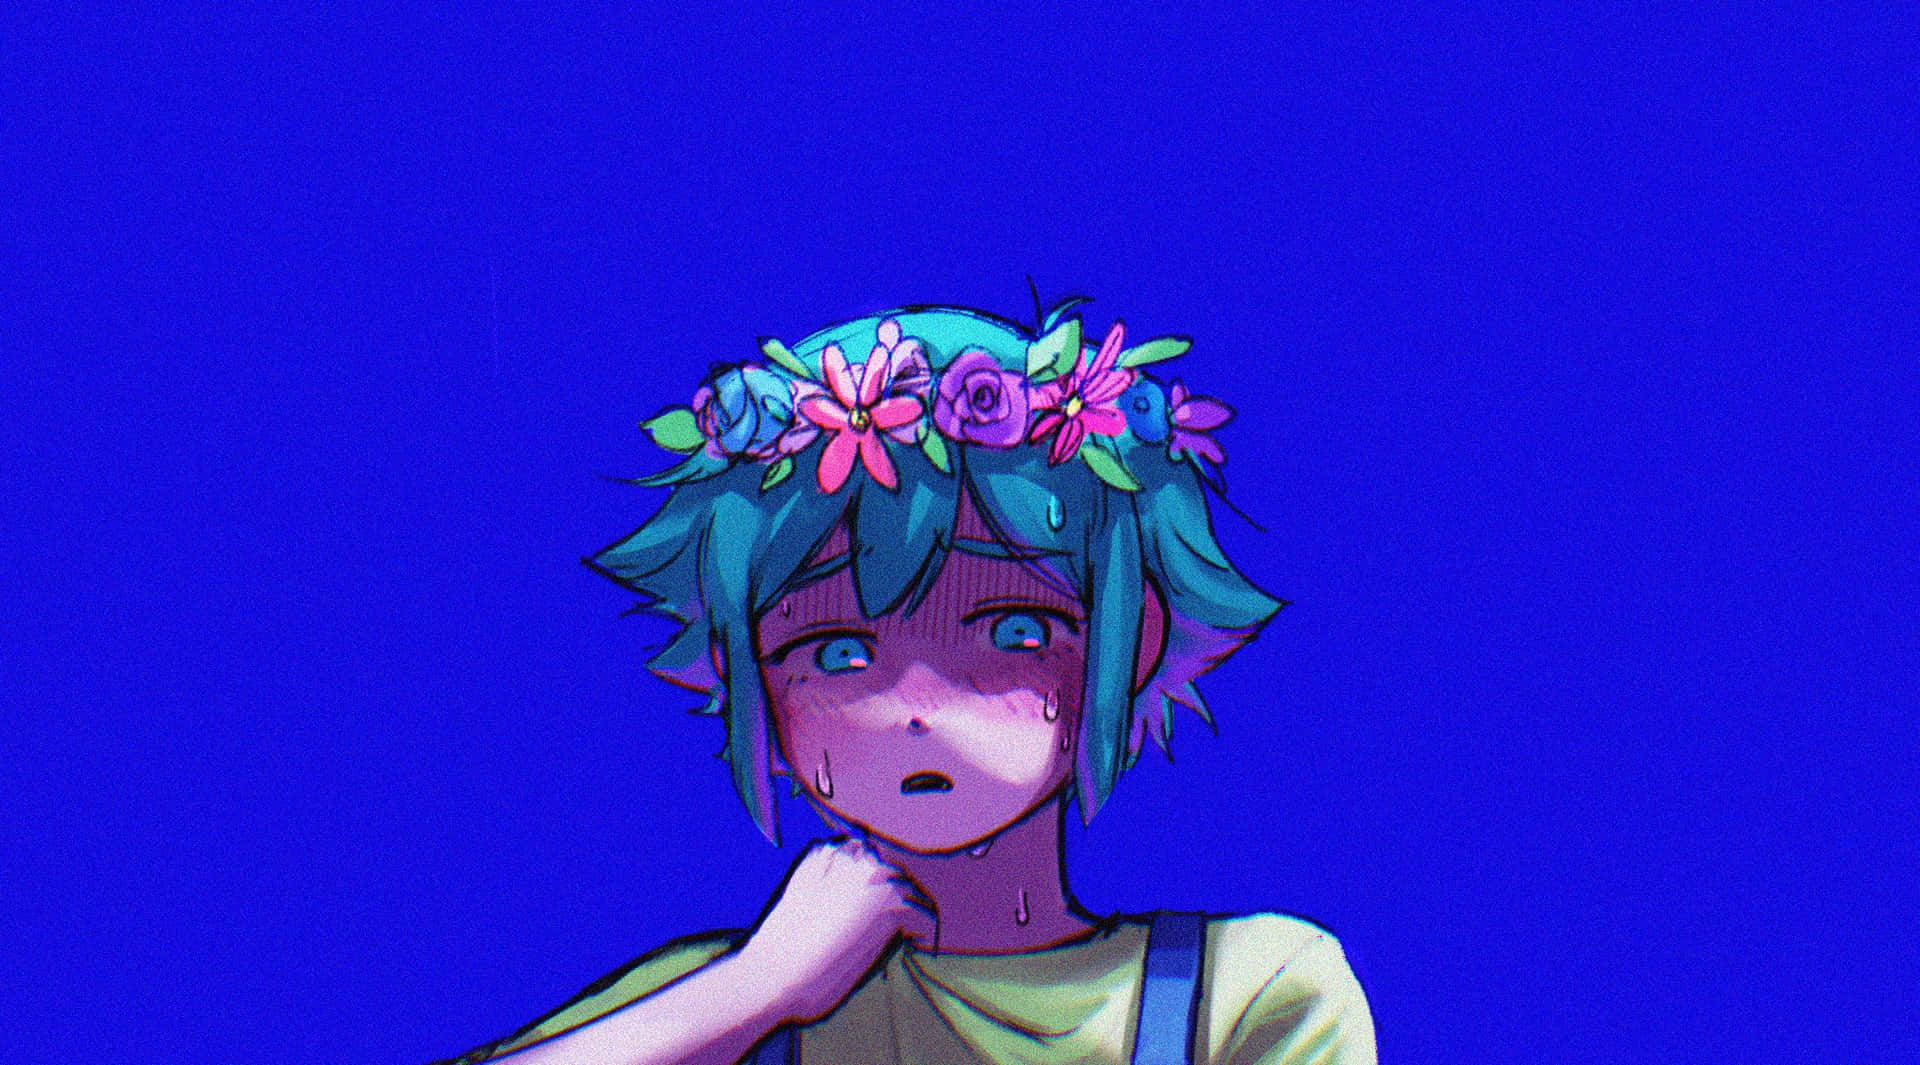 A Girl With Blue Hair And Flowers On Her Head